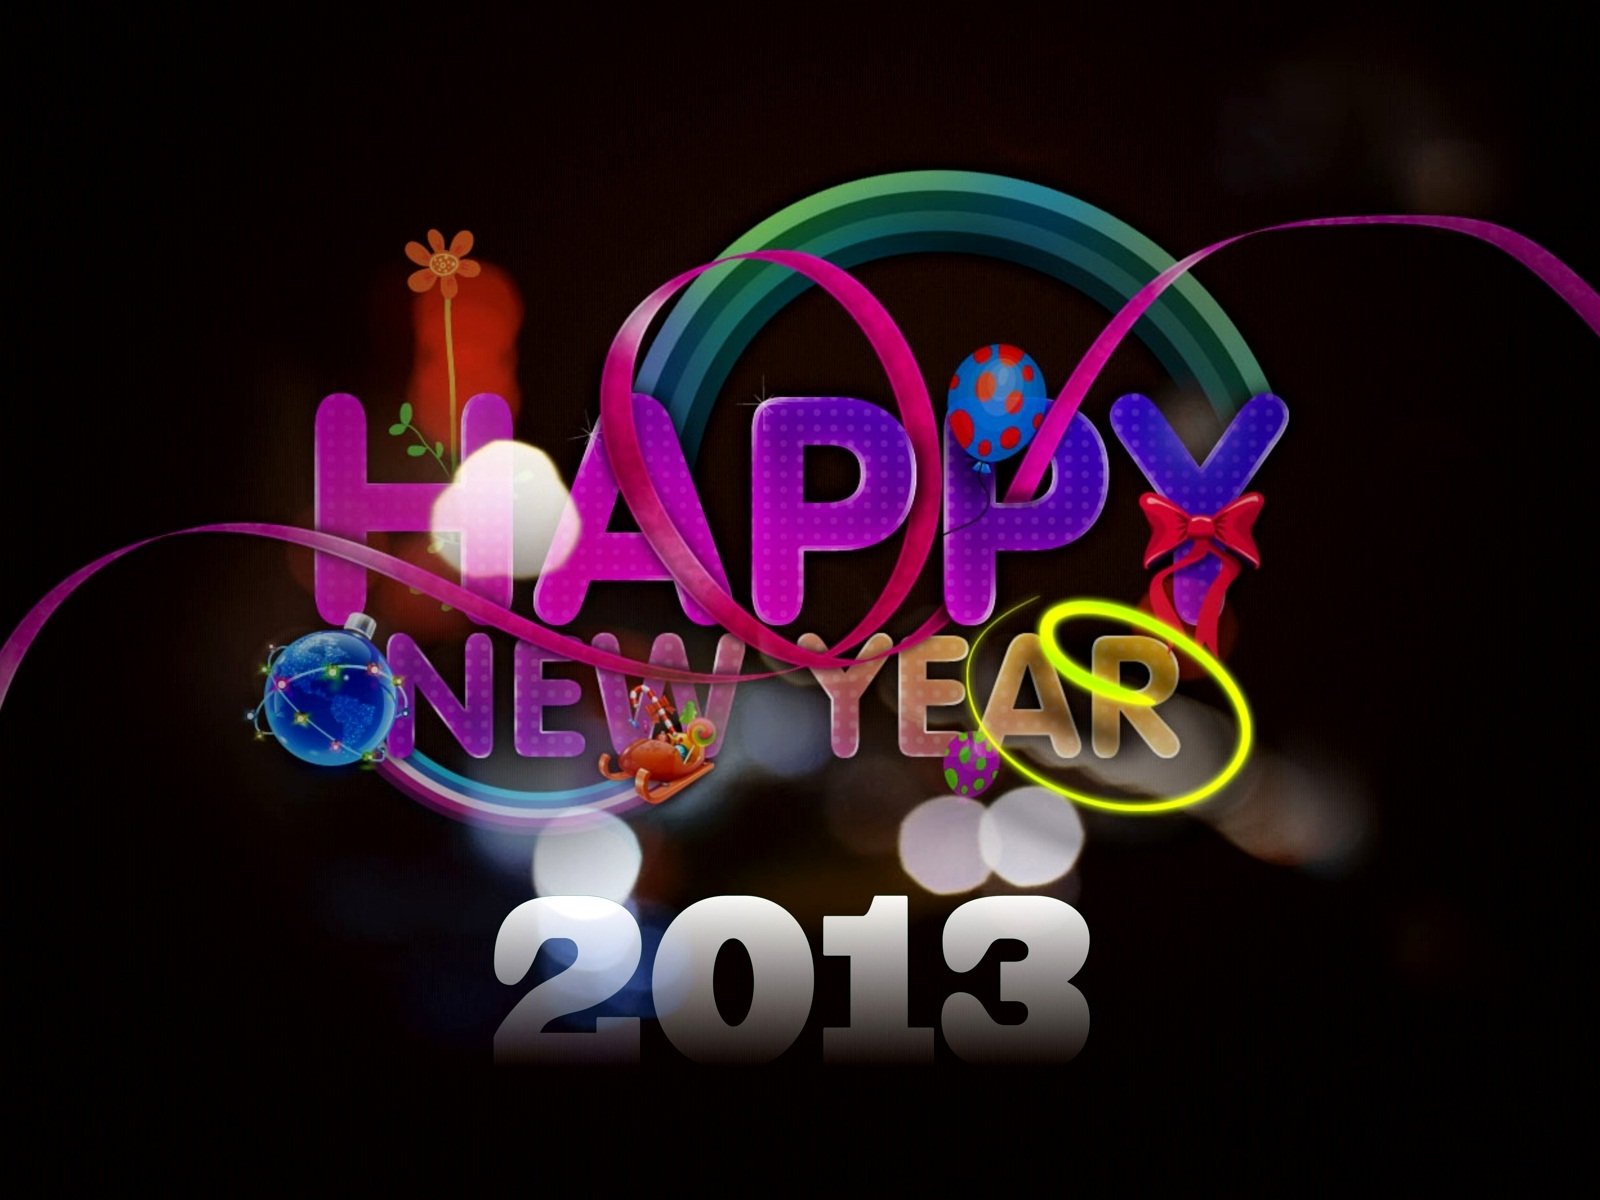 and Happy New Year 2013 Wallpapers HD Wallpapers Backgrounds 1600x1200